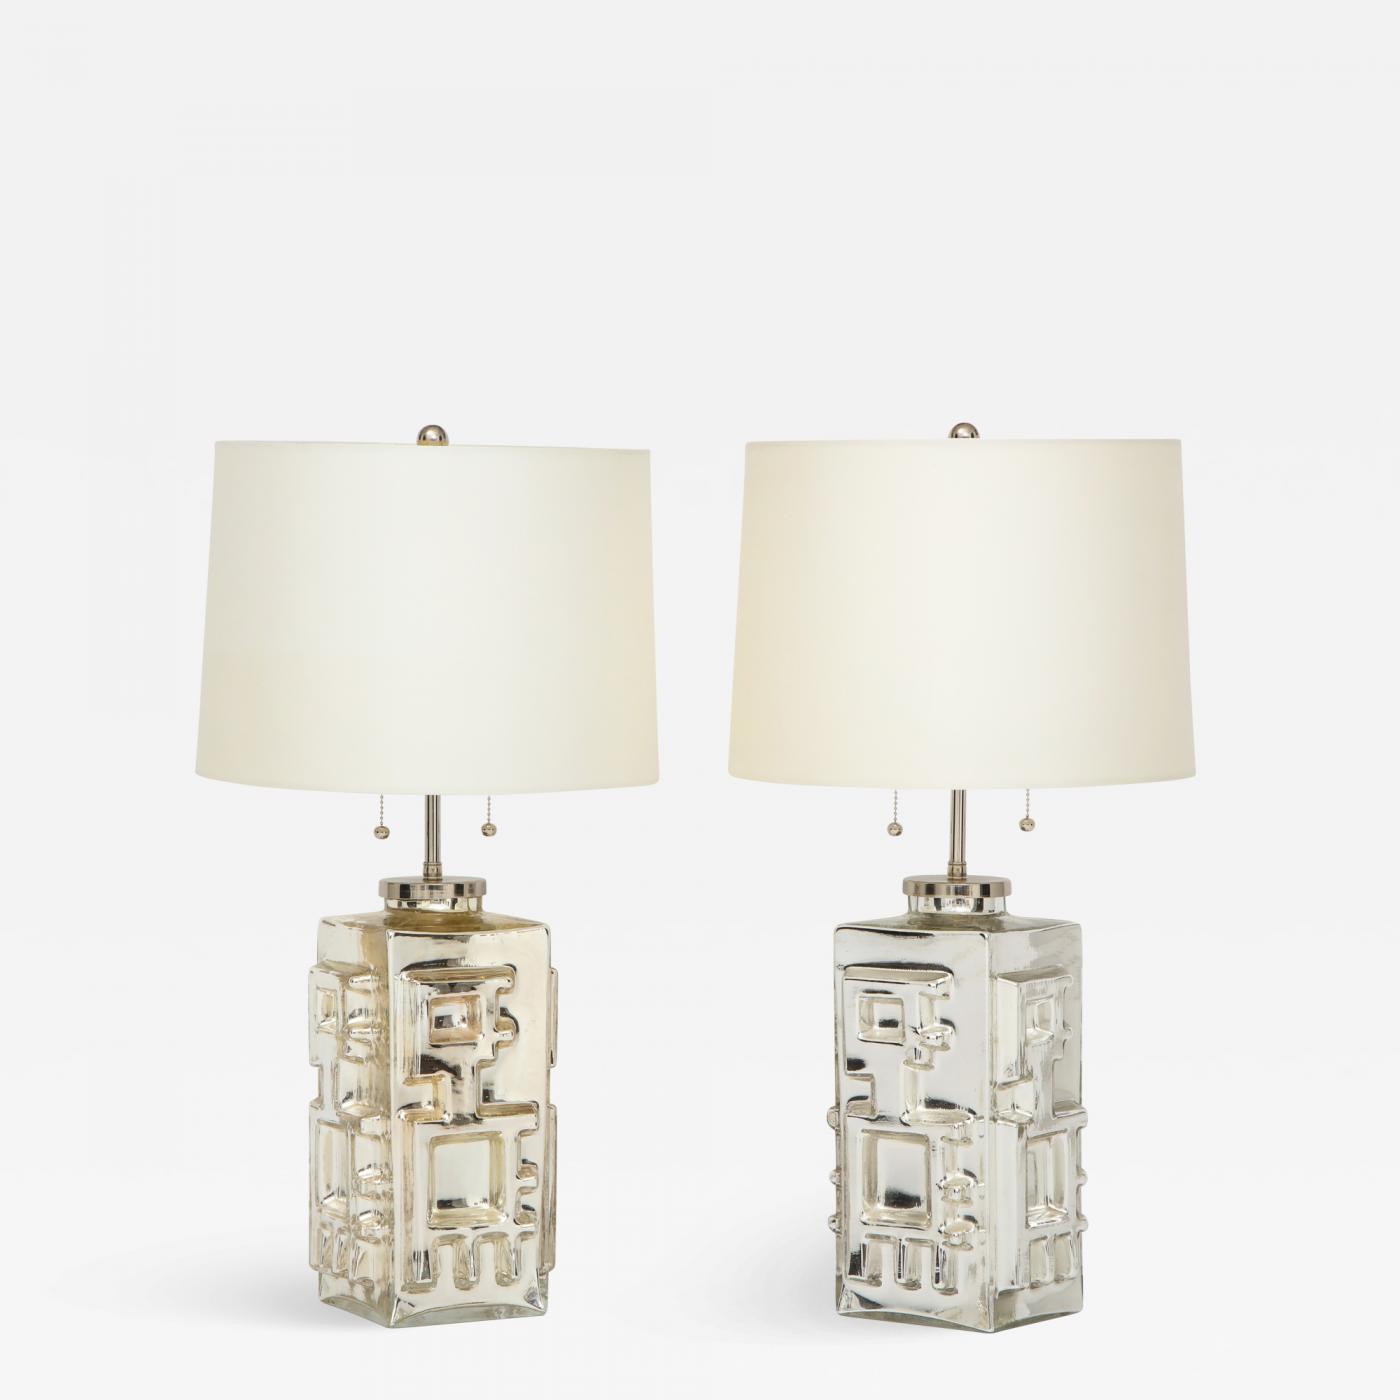 A pair of Mid Century Modern Mercury glass silver lamps